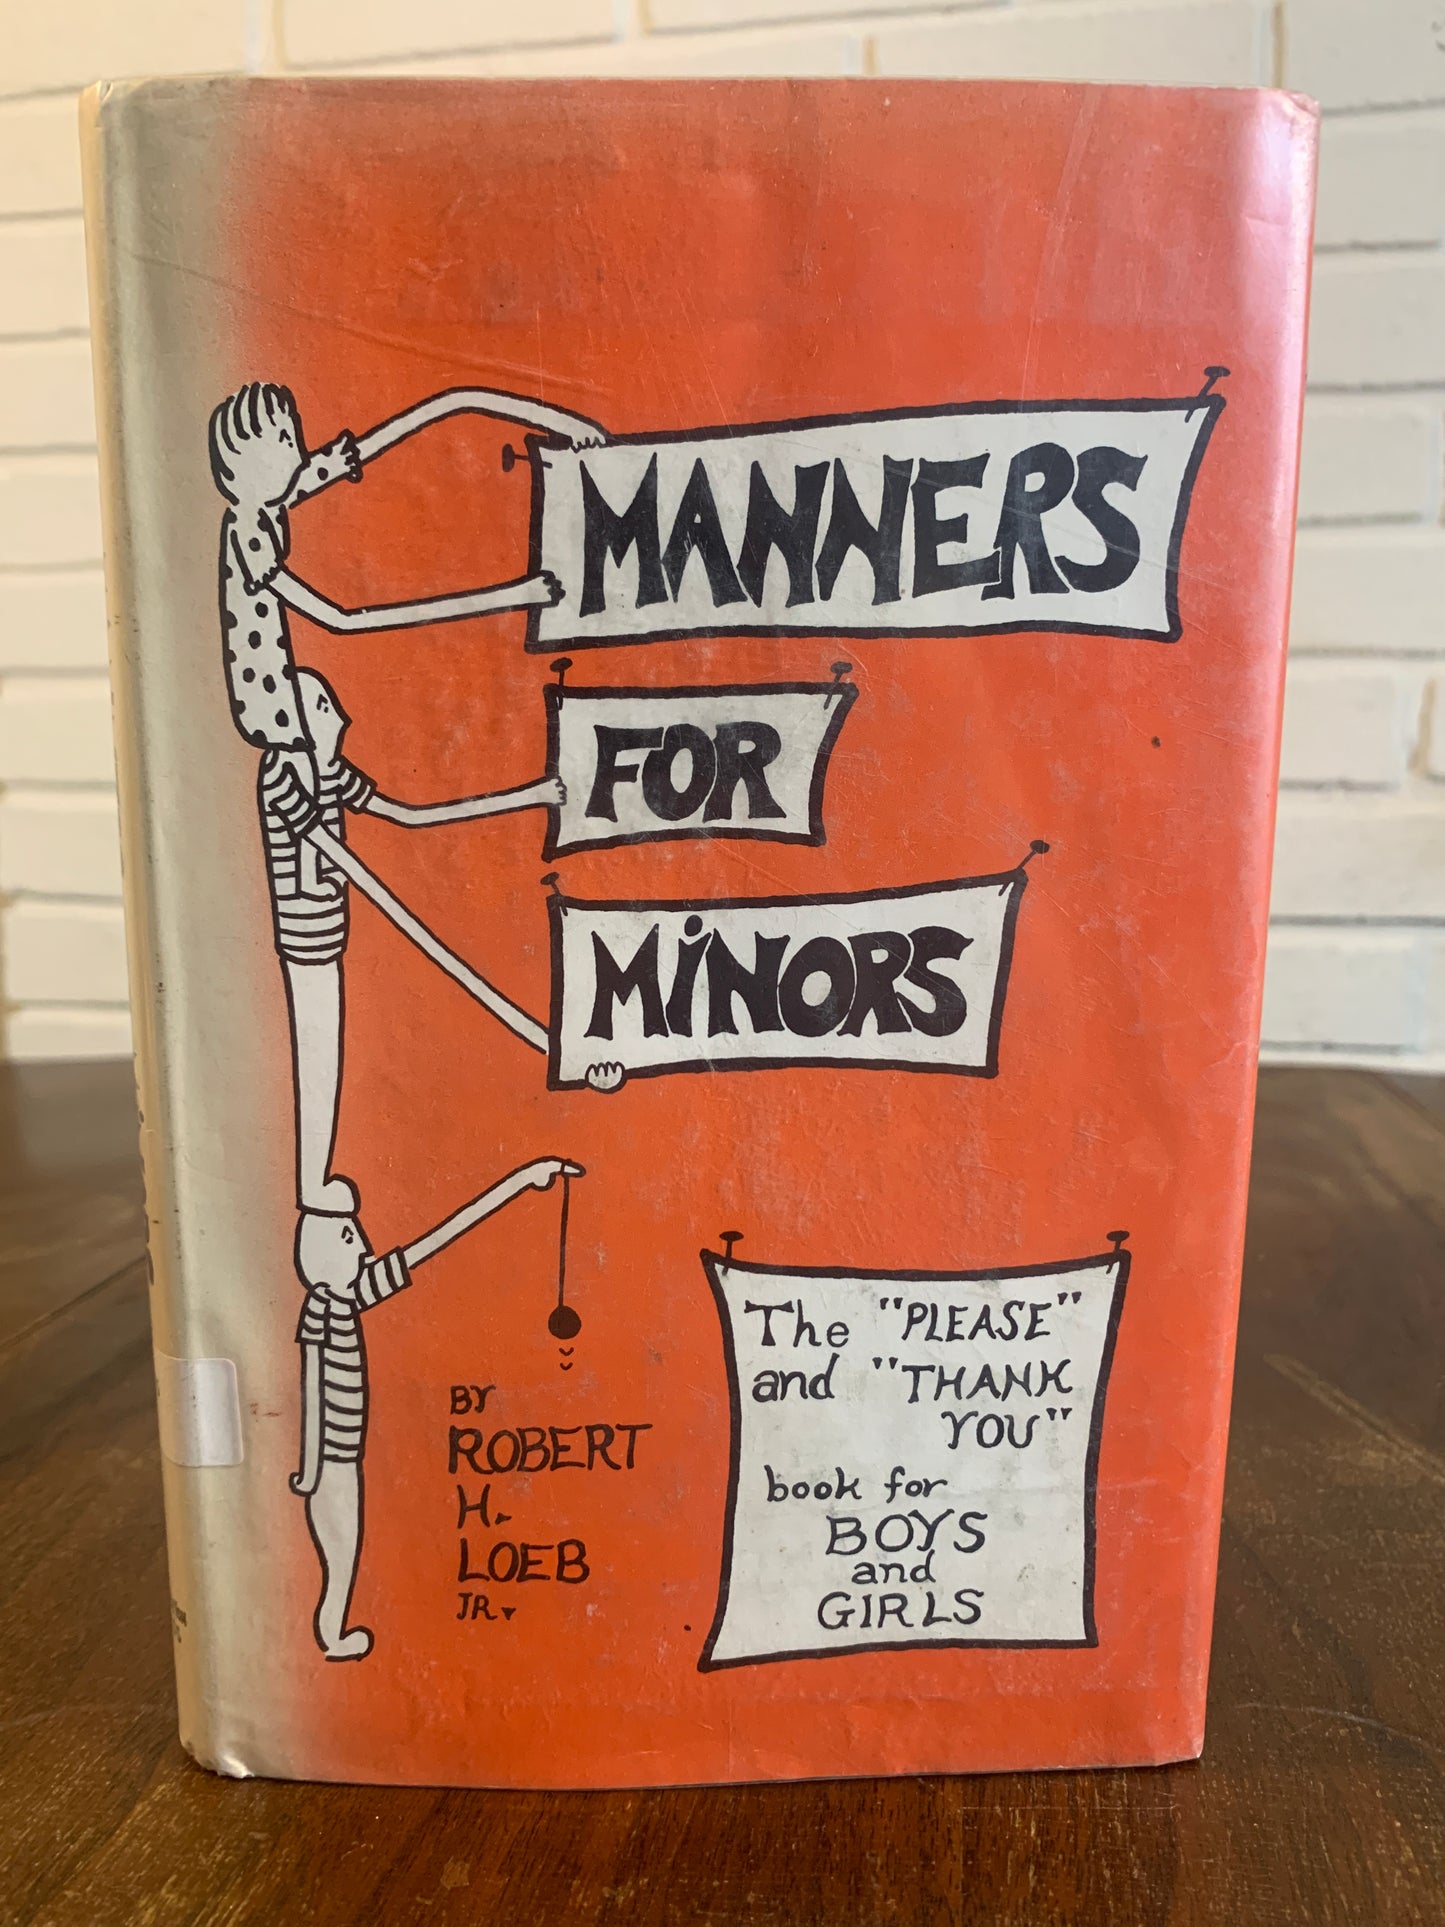 Manners for Minors by Robert H. Loeb 1964